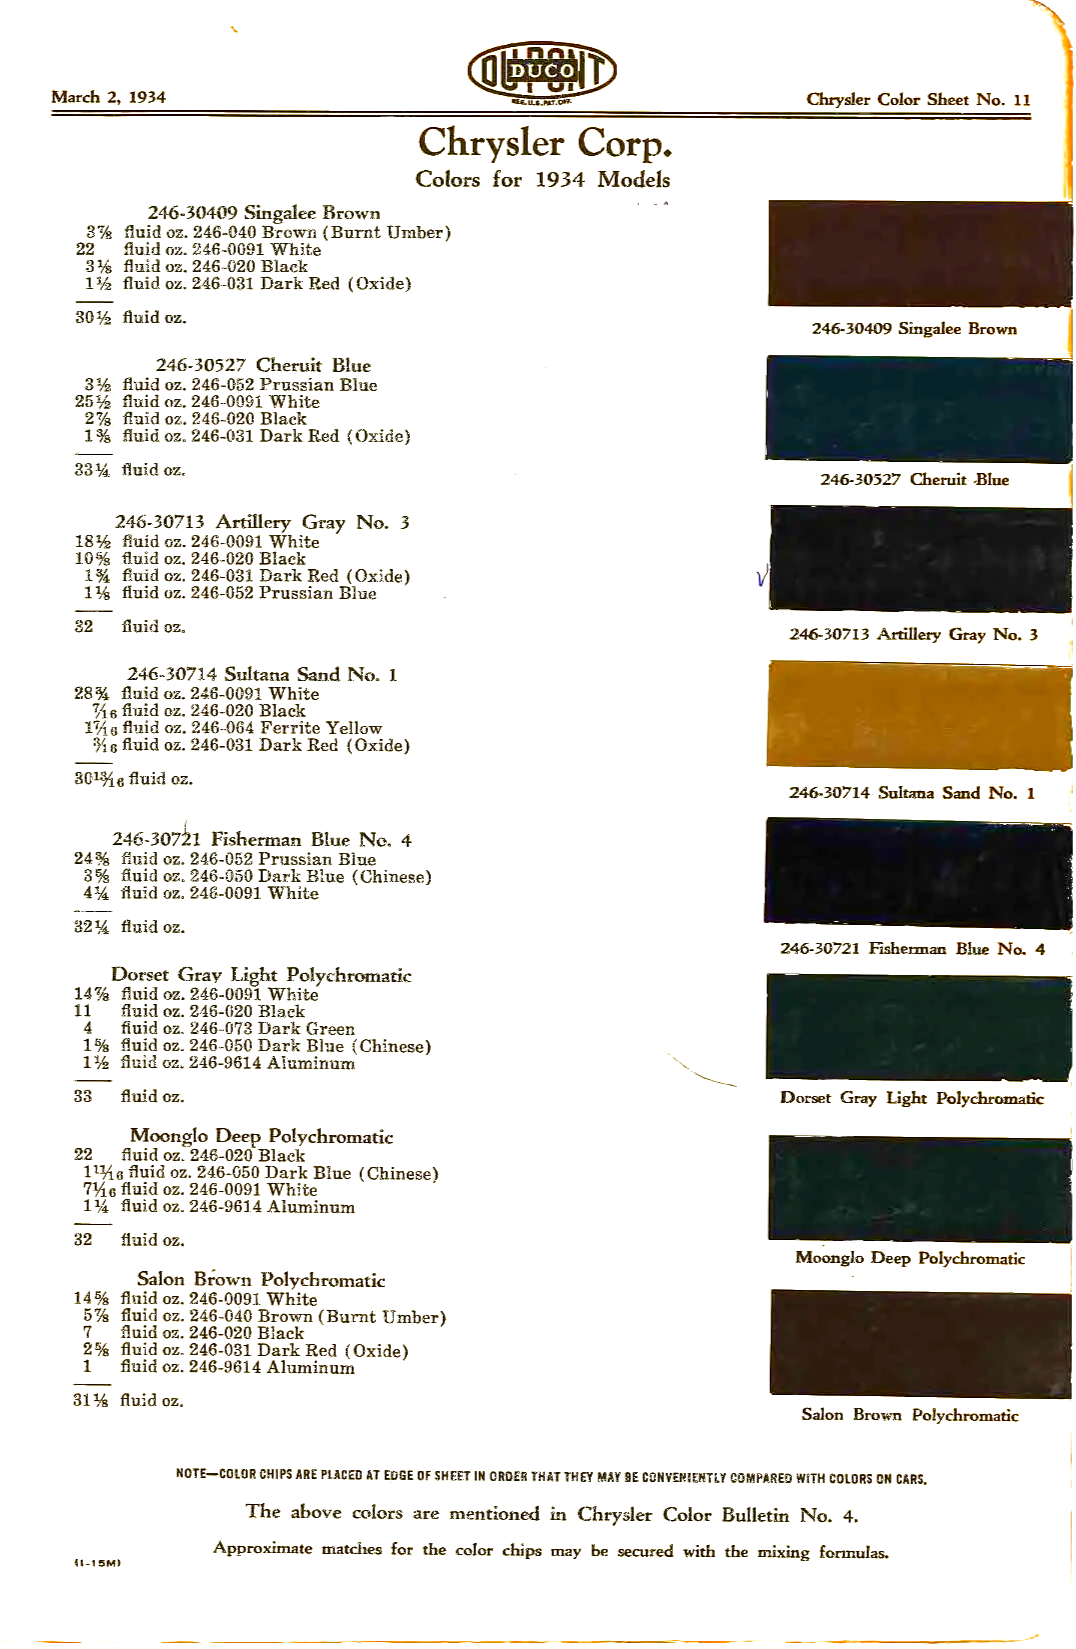 paint chips from 1934